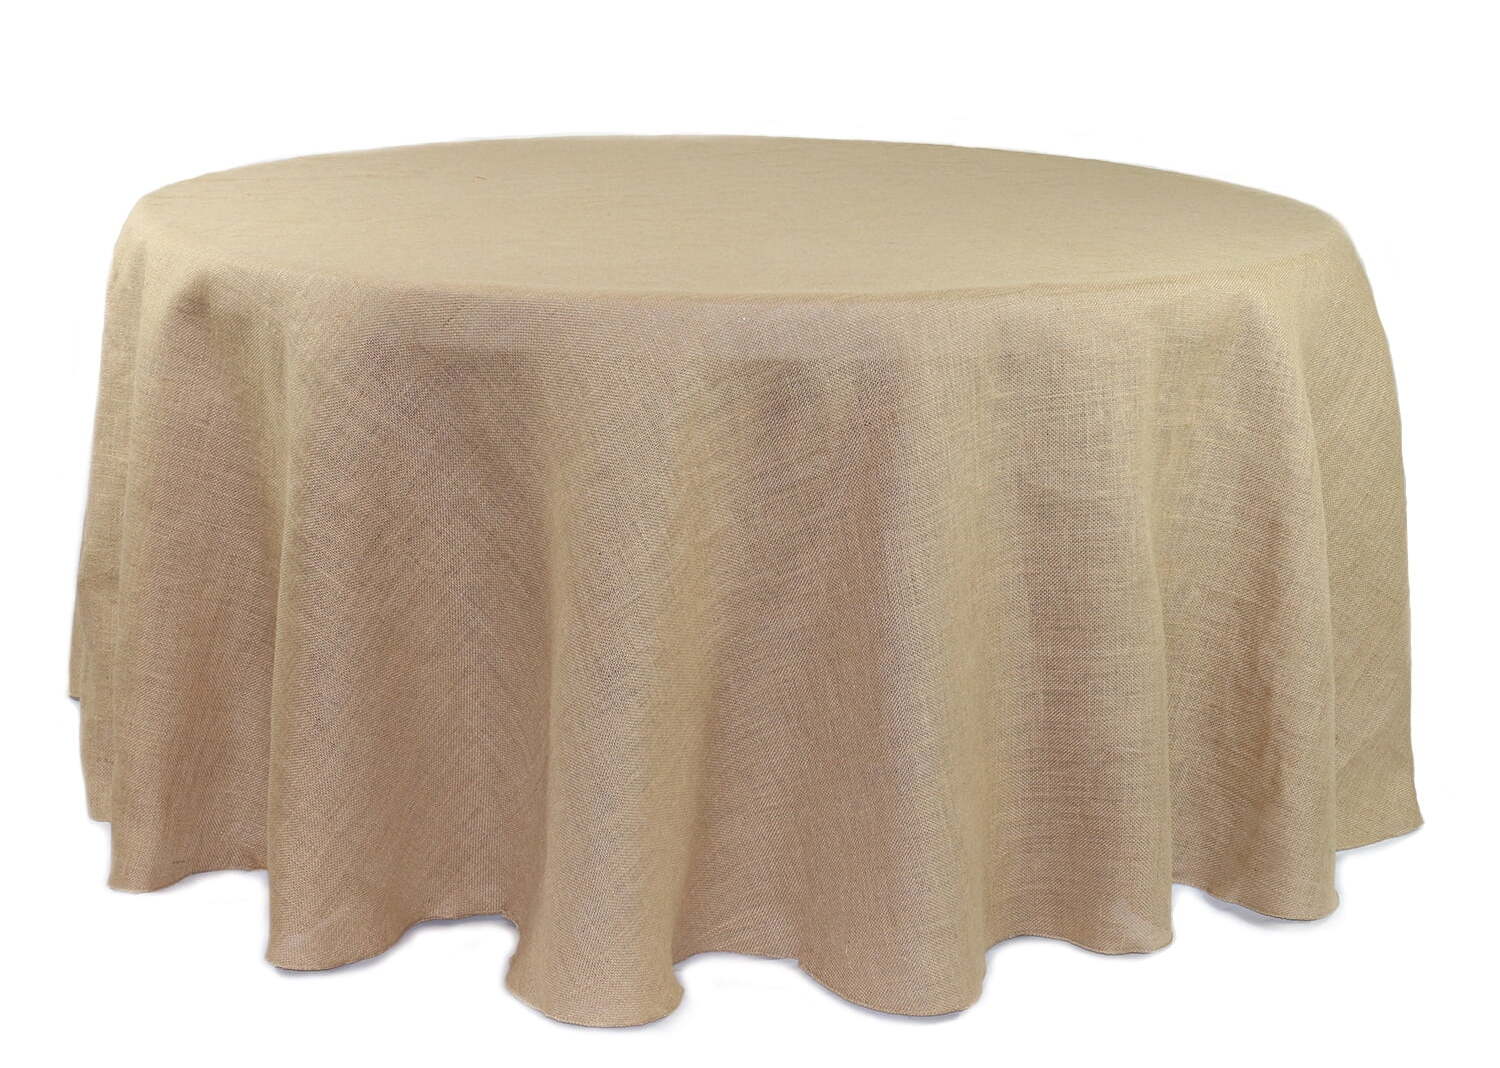 How To Make A 120-Inch Round Tablecloth